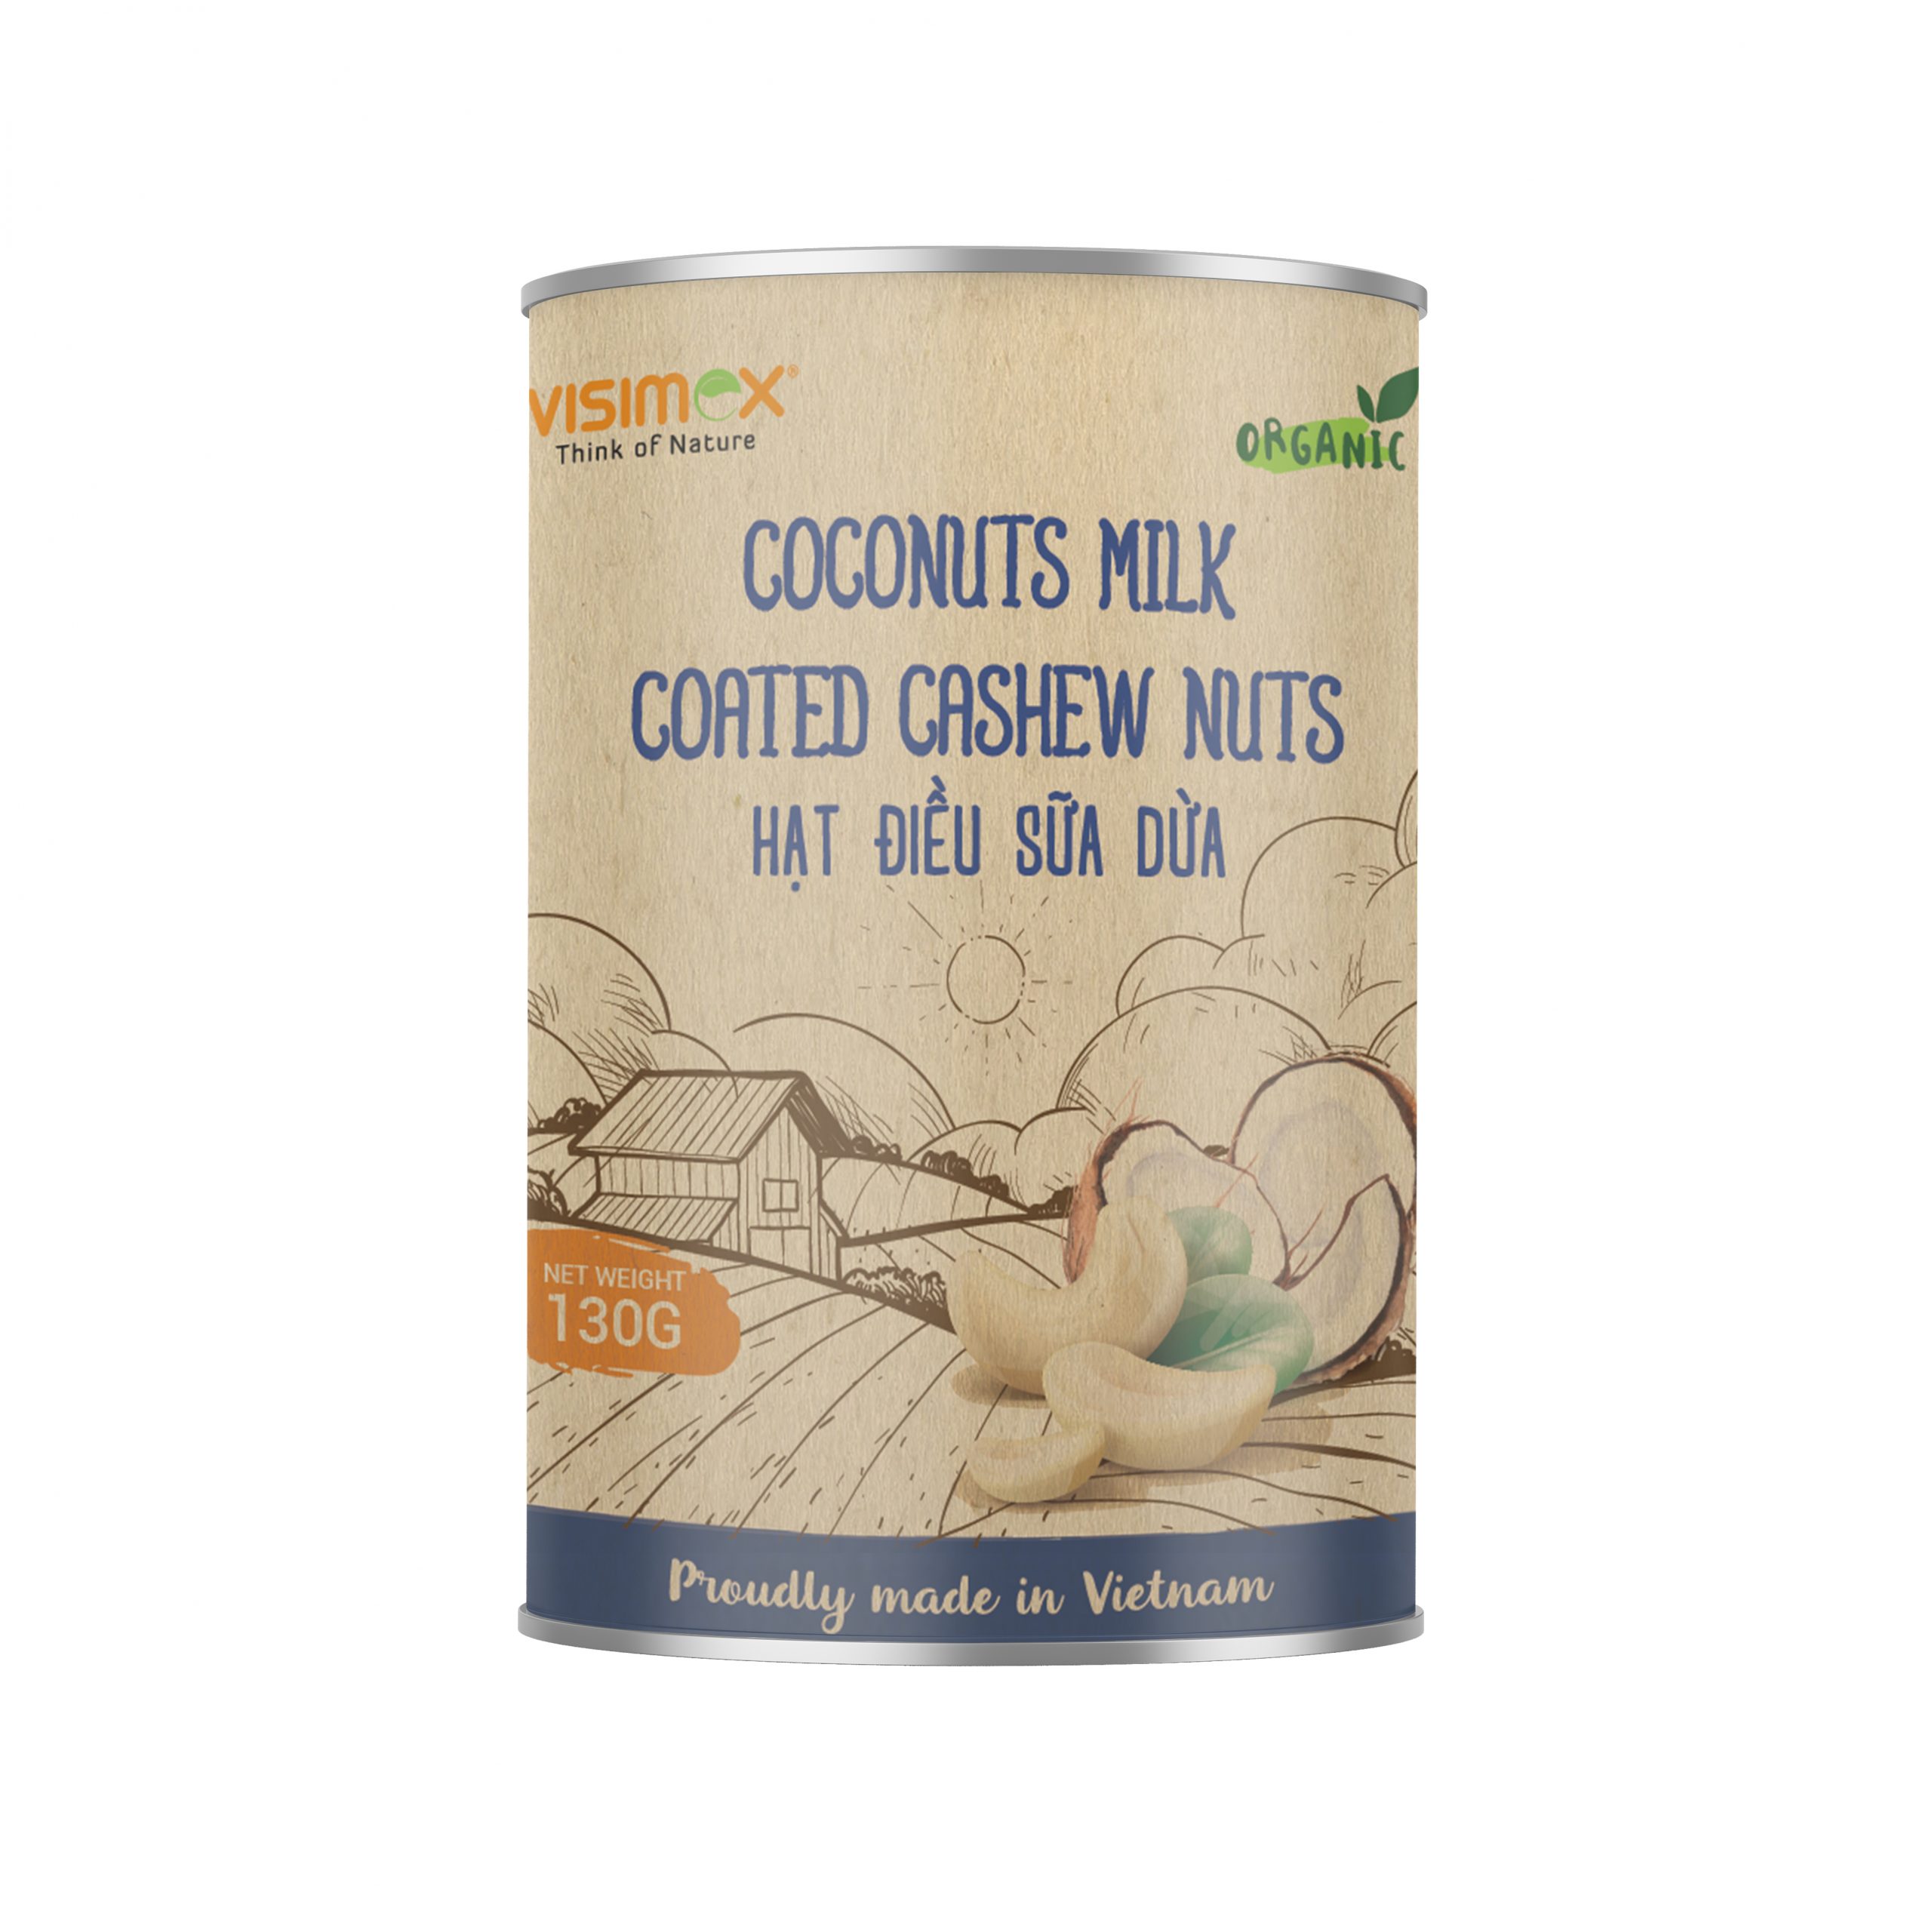 CASHEW NUTS WITH COCONUT MILK